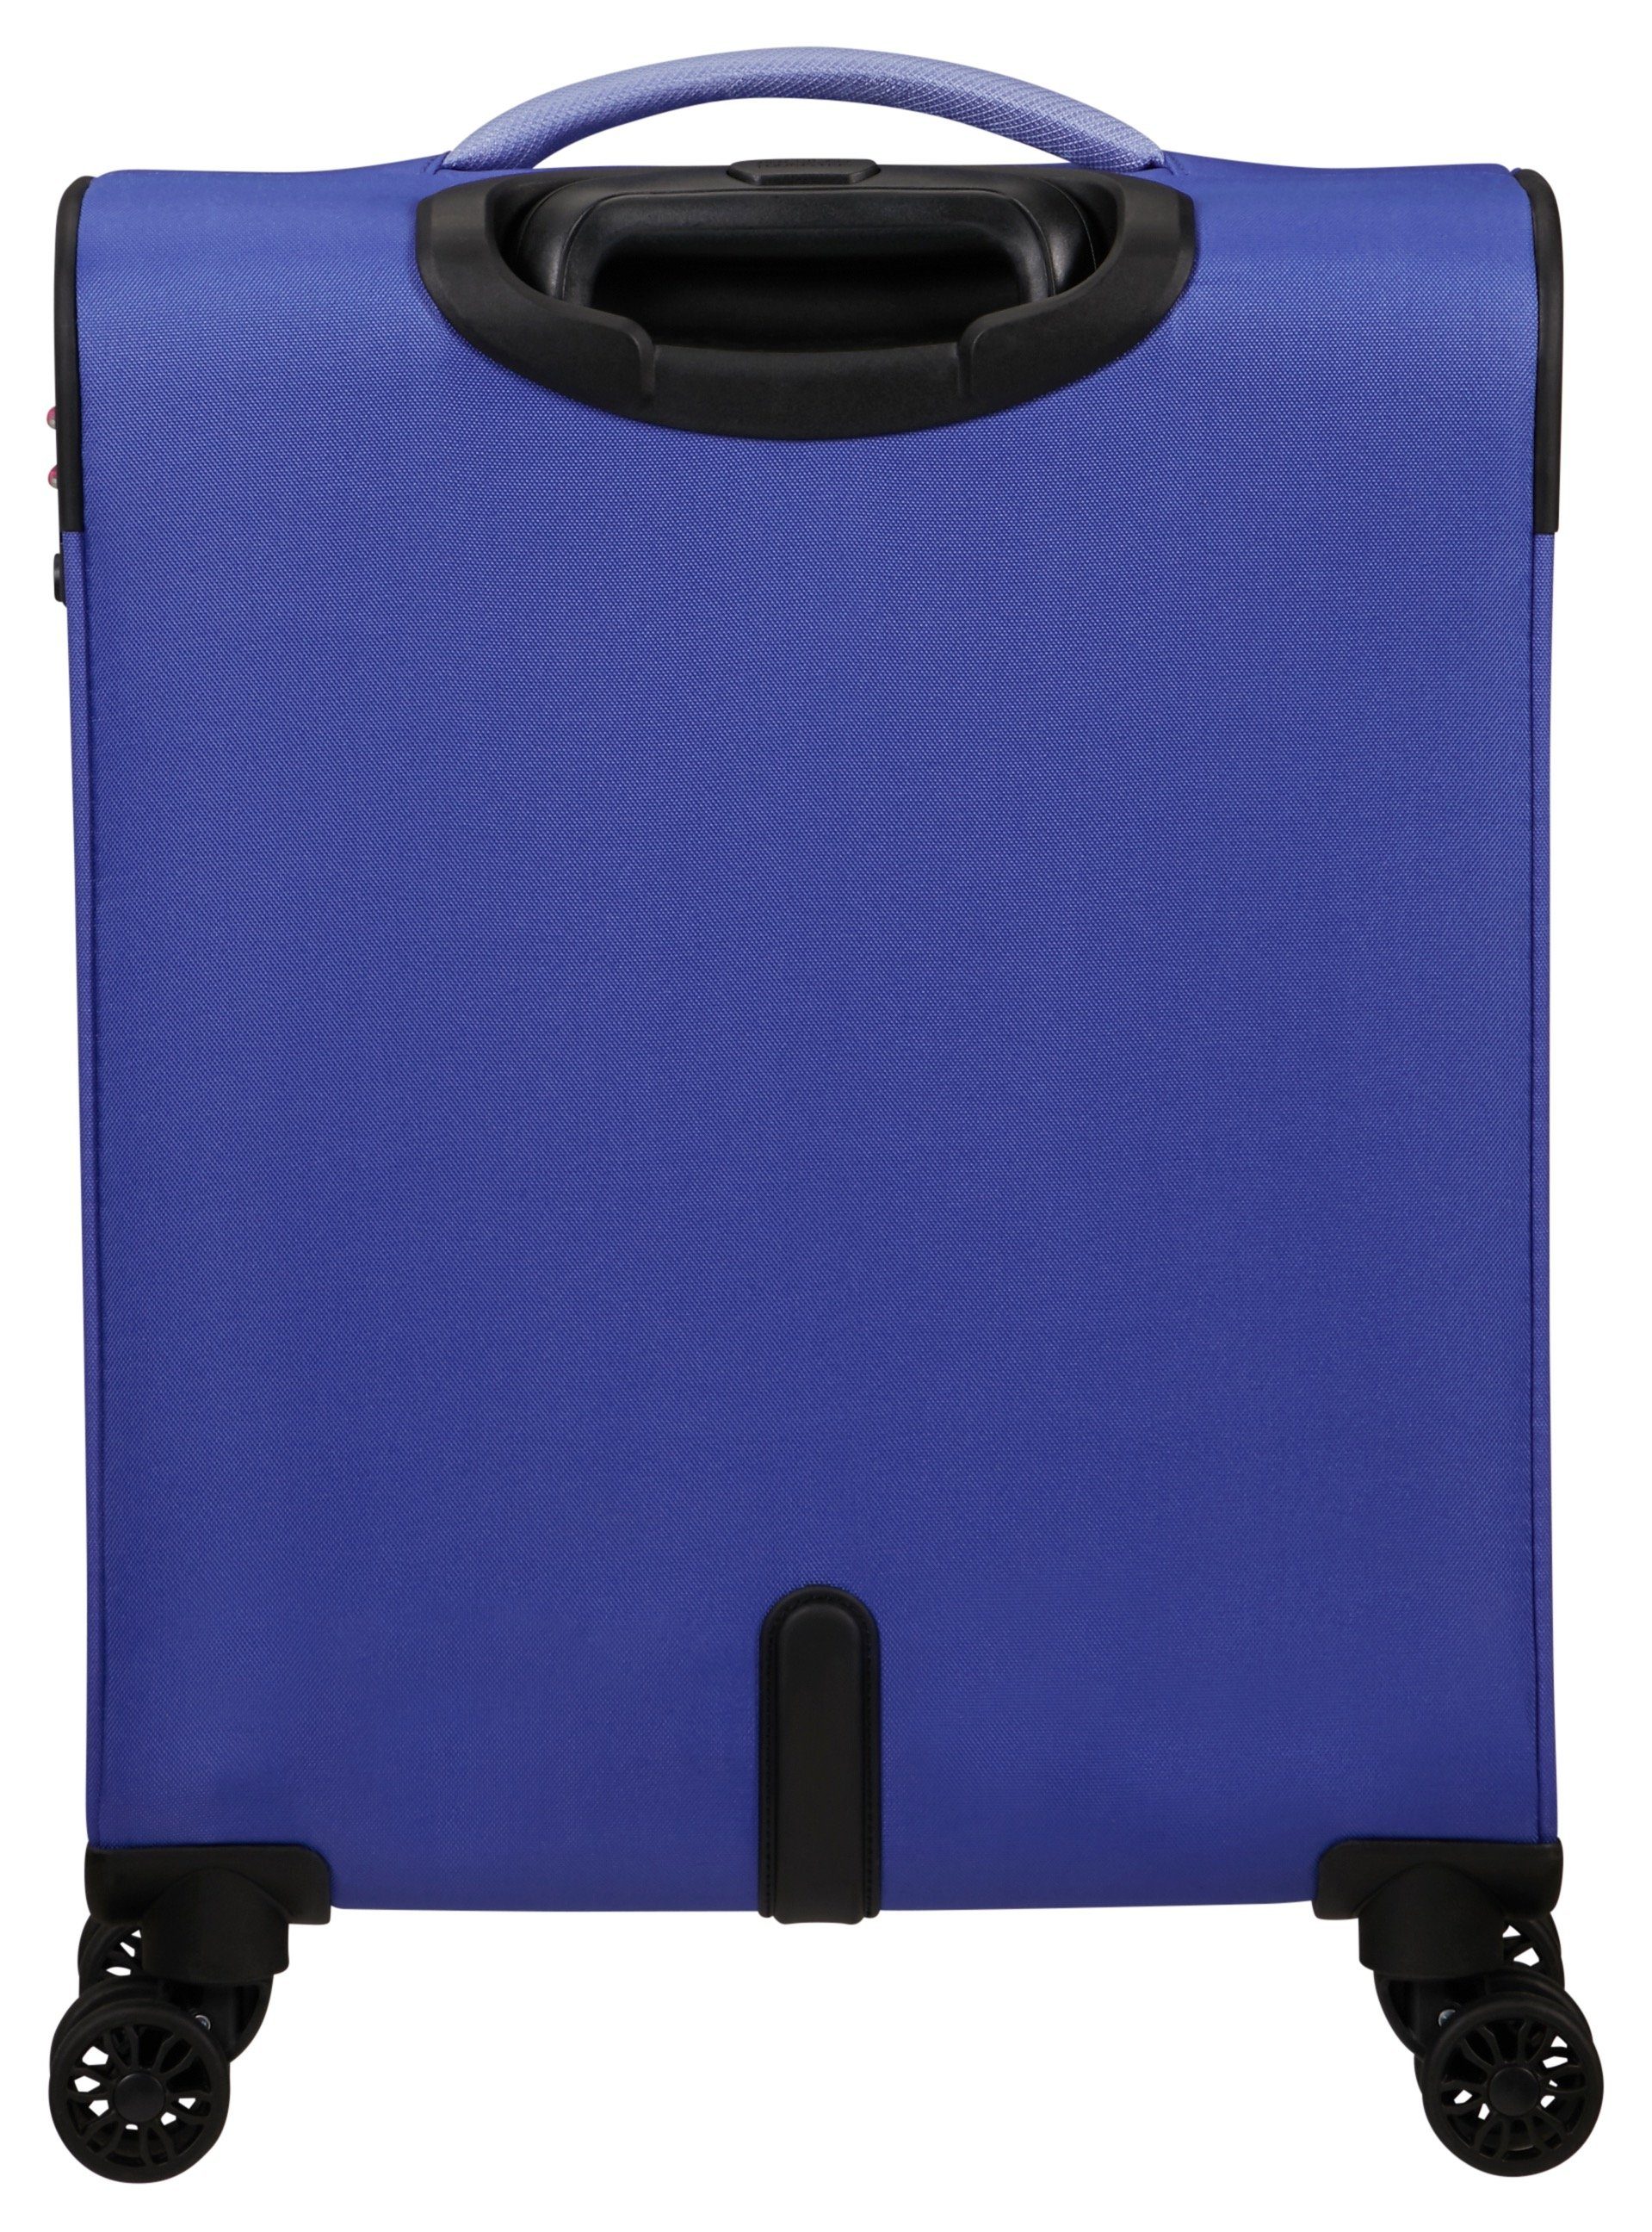 4 Koffer American Tourister® lilac Spinner 55, Rollen PULSONIC soft